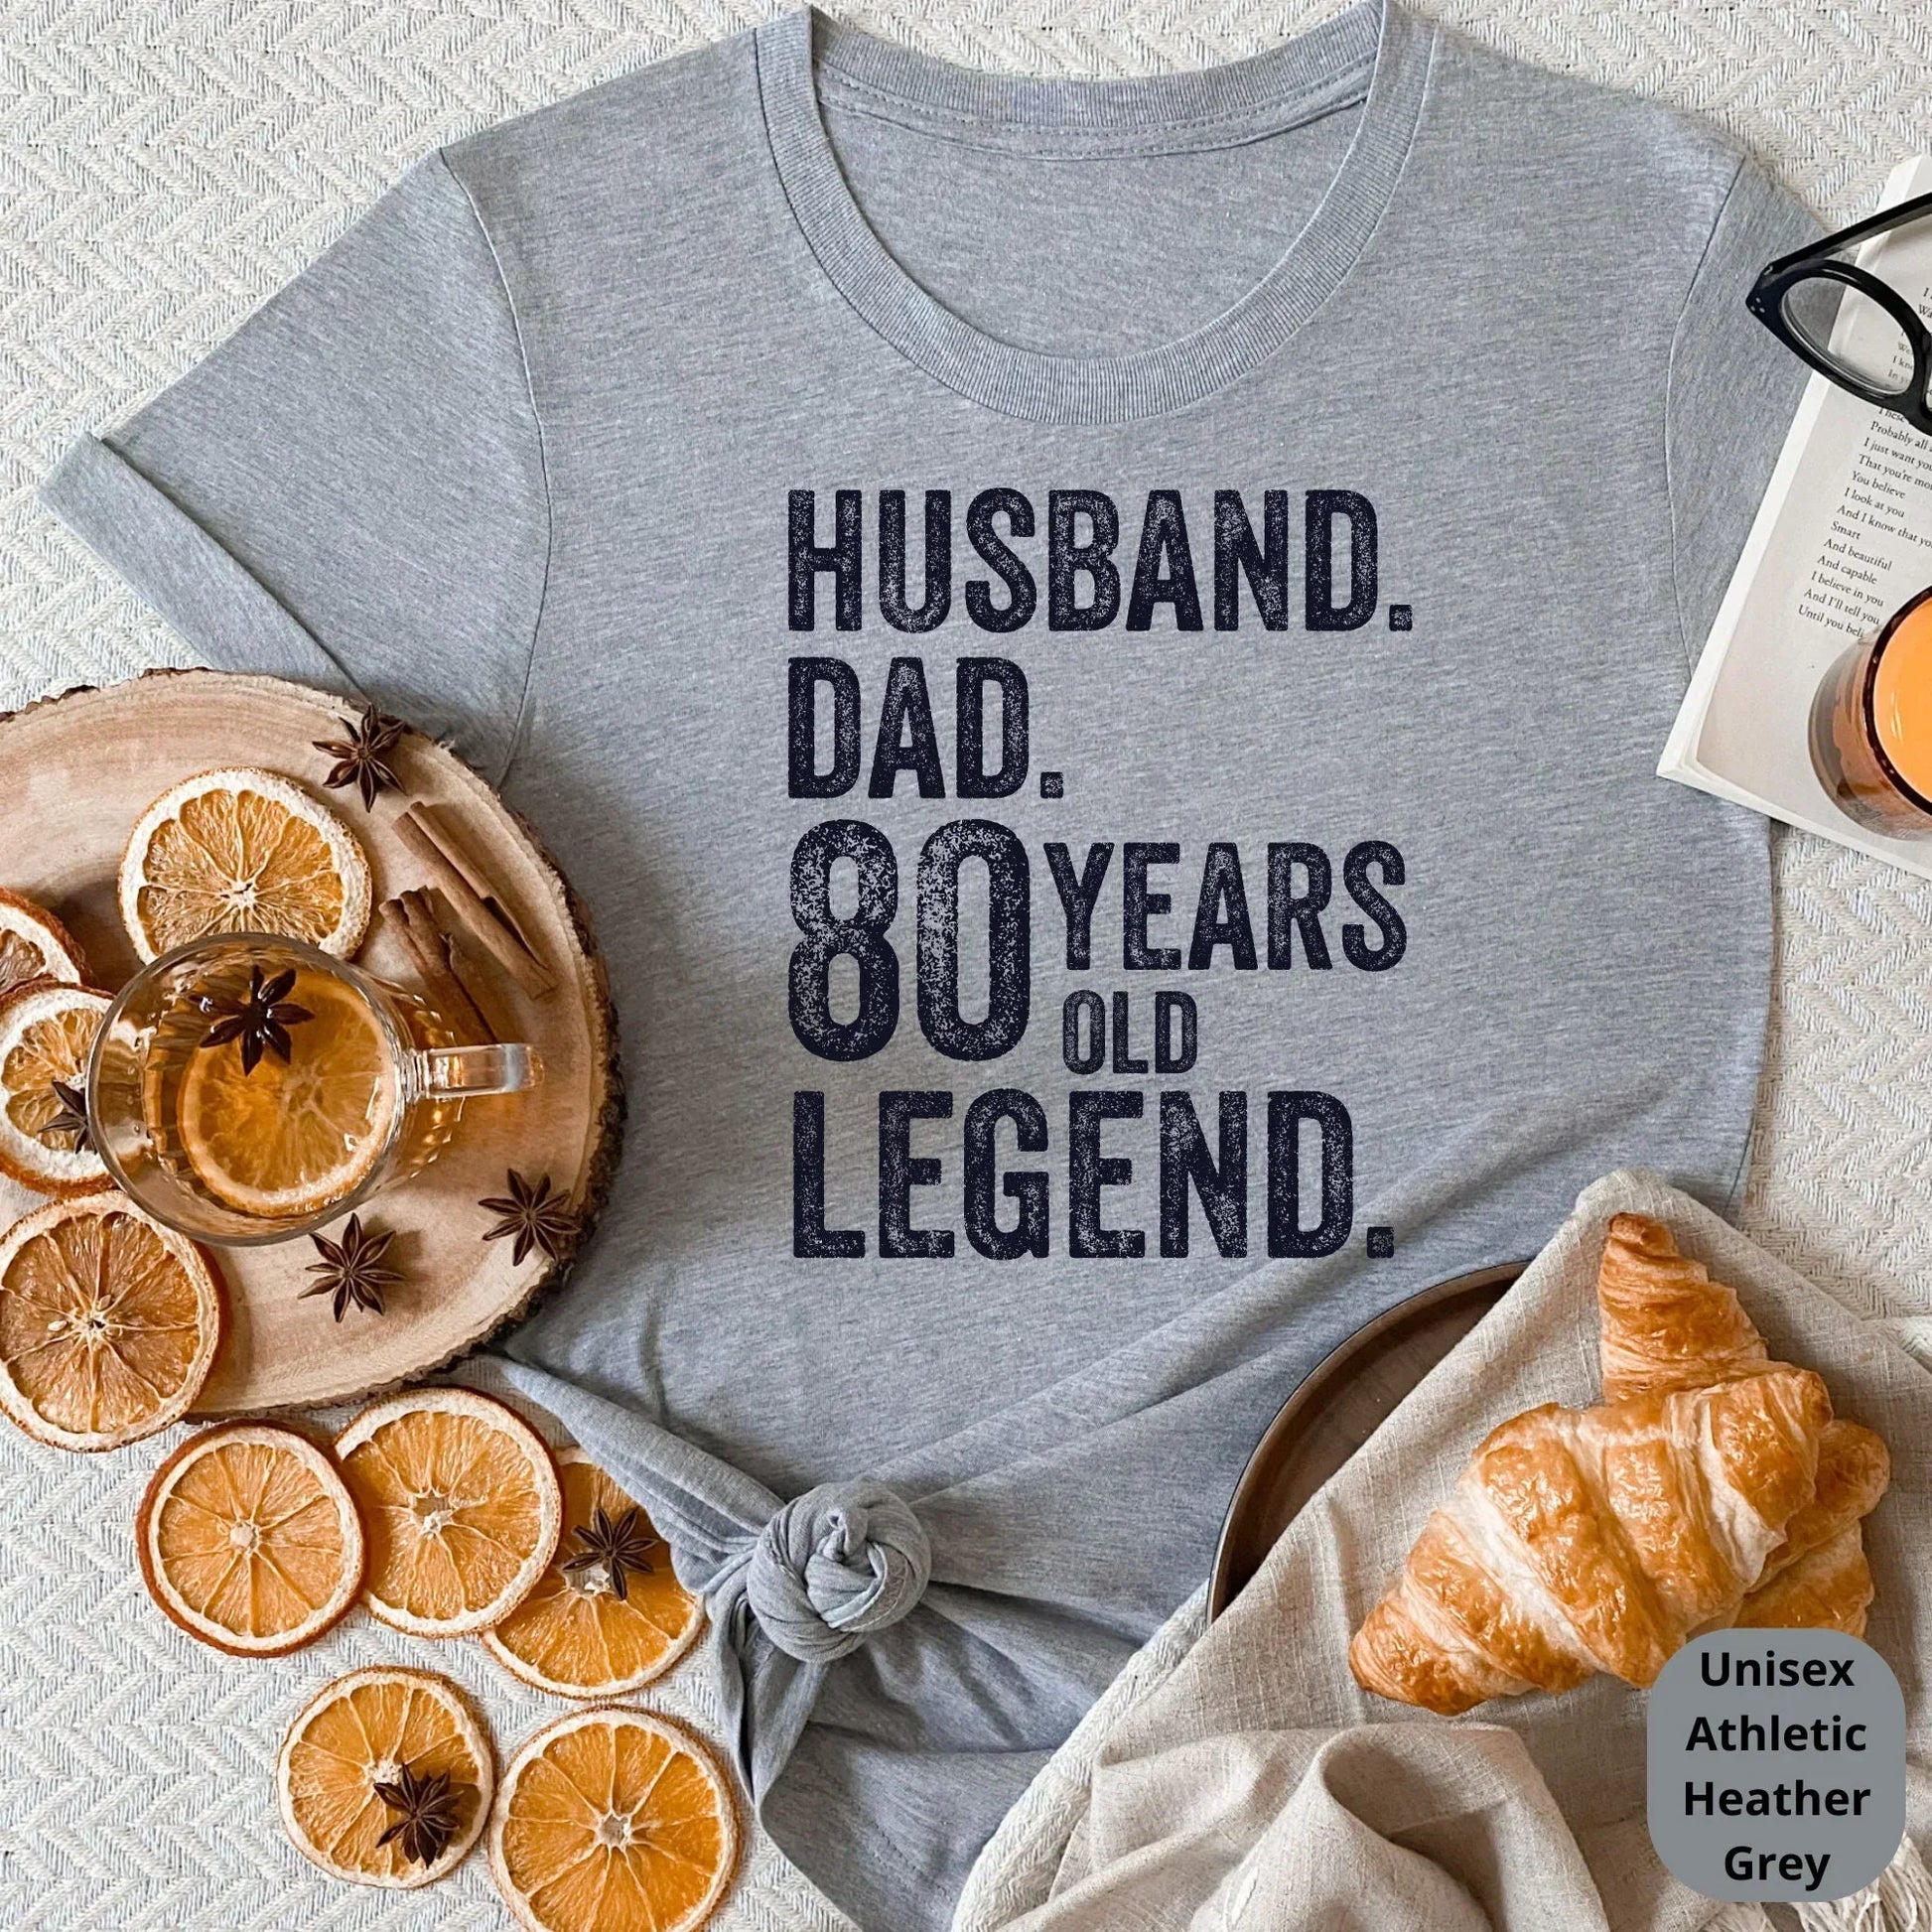 Husband, Dad, 80 Year Old Legend, Celebrate a Lifetime of Memories with Our Customizable 80th Birthday Shirt